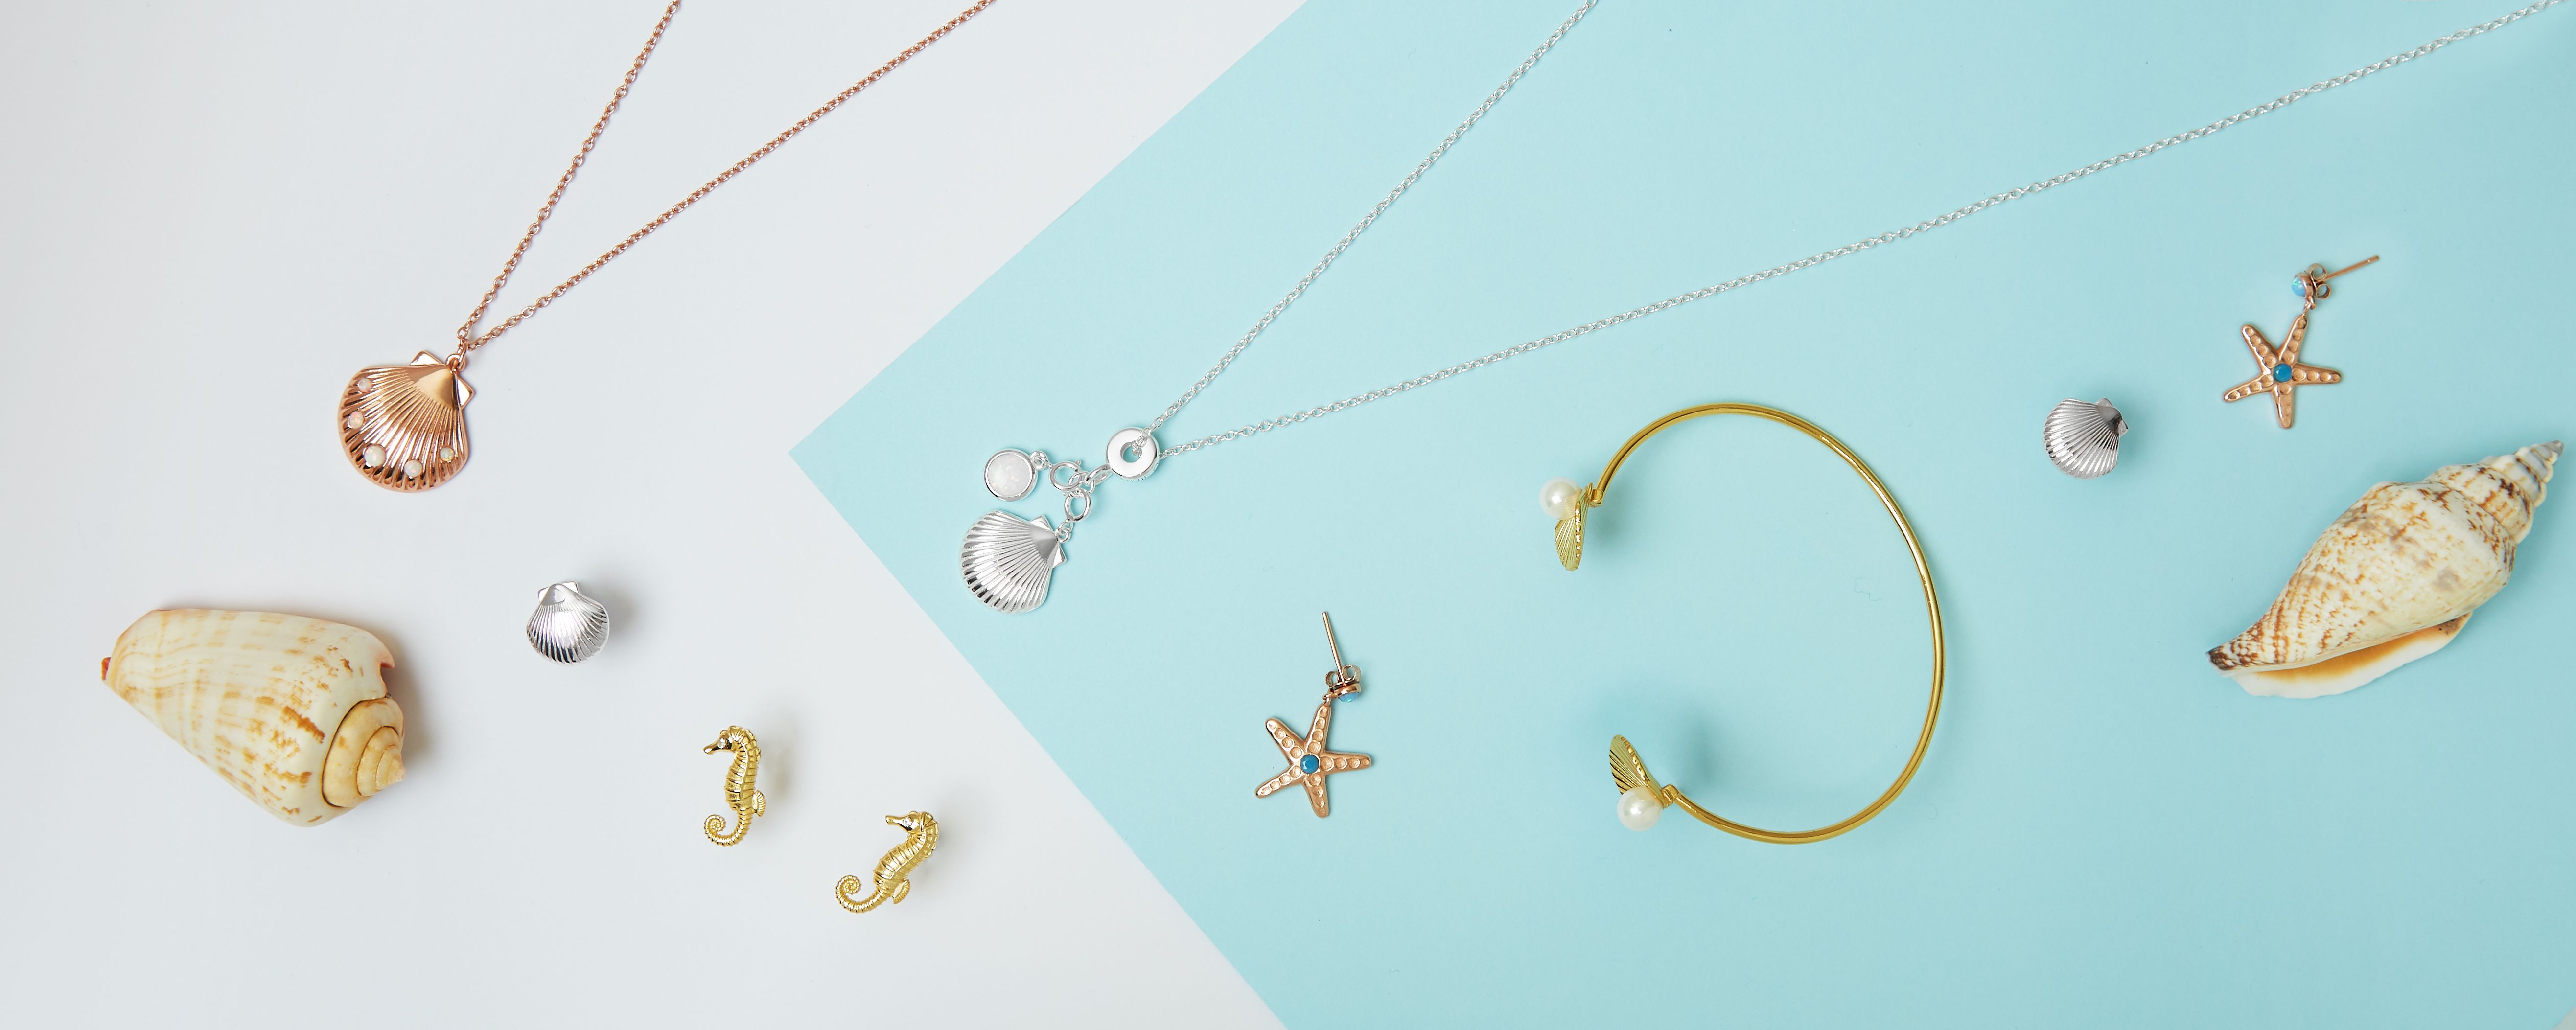 SUSTAINABLE JEWELLERY BRAND ANNIE OAK ANNOUNCES PARTICIPATION IN UPCOMING DIGITAL TRADE SHOWS